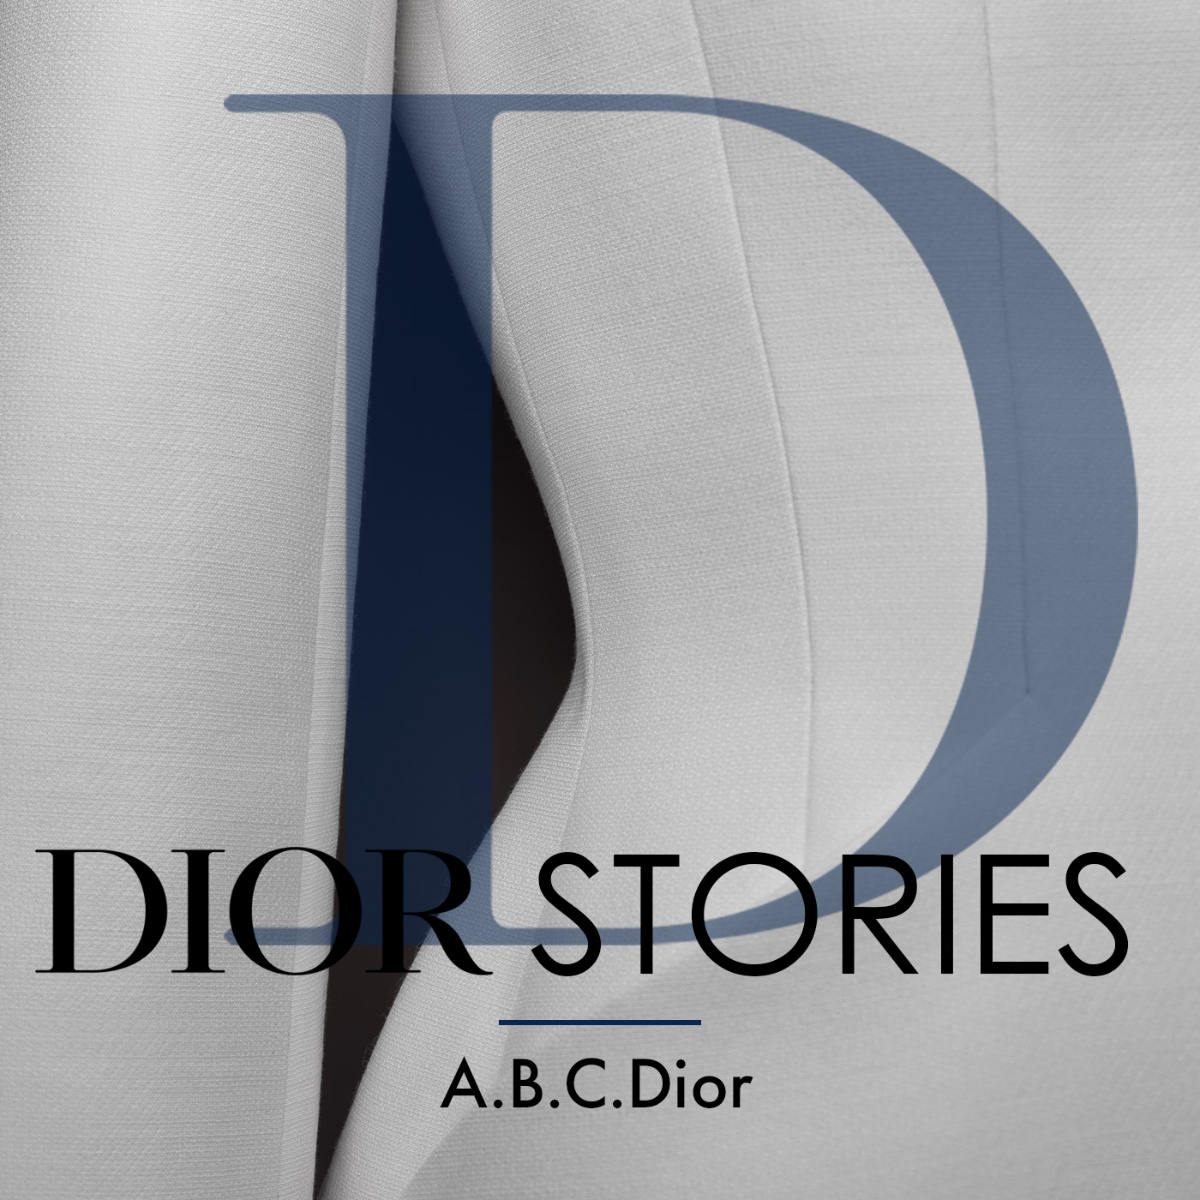 An Episode Of The A.B.C. Dior Podcast Dedicated To Miss Dior